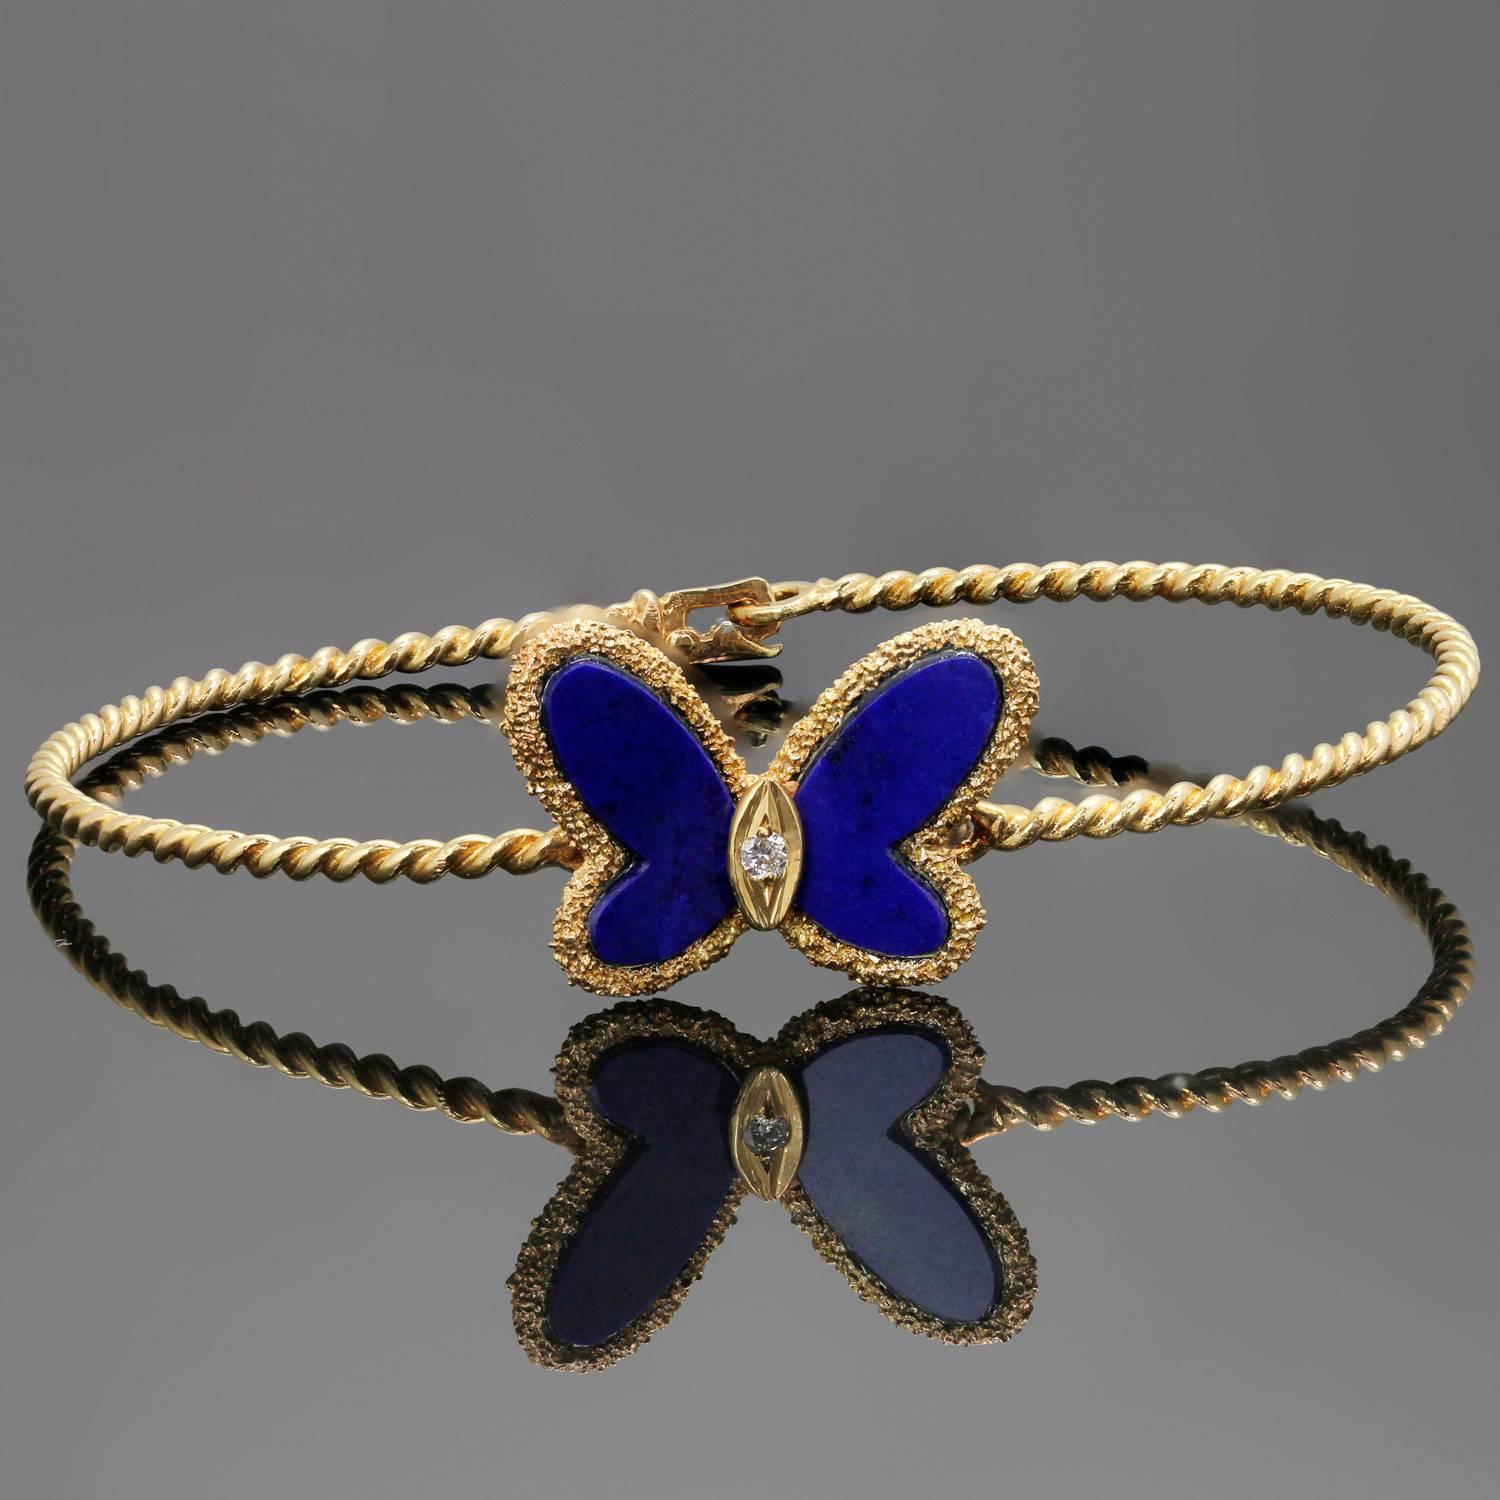 This stunning bracelet by Van Cleef & Arpels is crafted in 18k yellow gold and beautifully accented with a butterfly inlaid with blue Lapis Lazuli wings and a brialliant round-cut diamond. Measurements: 7" (17.7cm) length. 